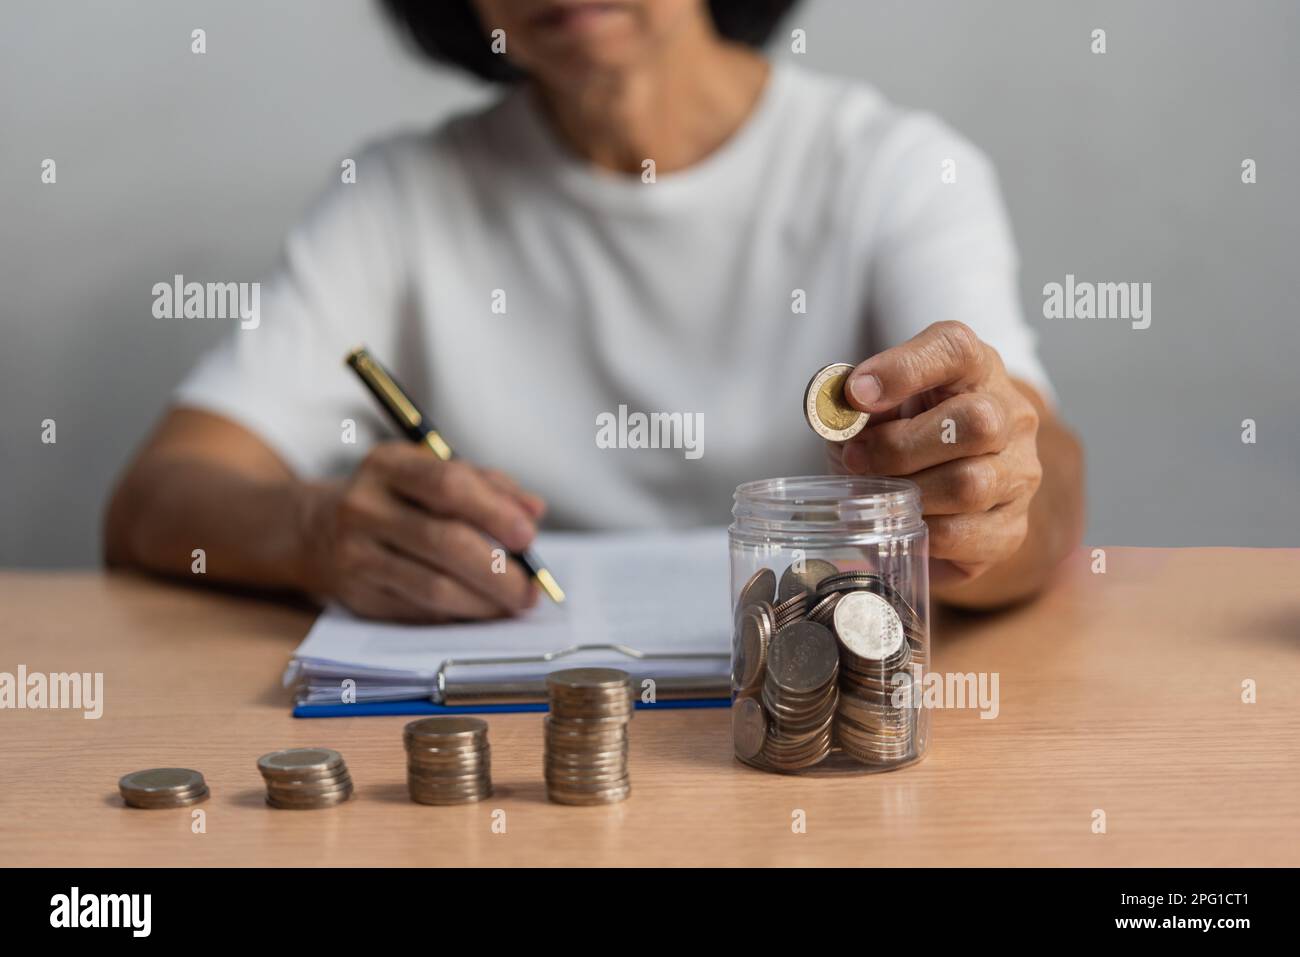 woman saving money with putting coins in glass, finance and accounting concept. Stock Photo